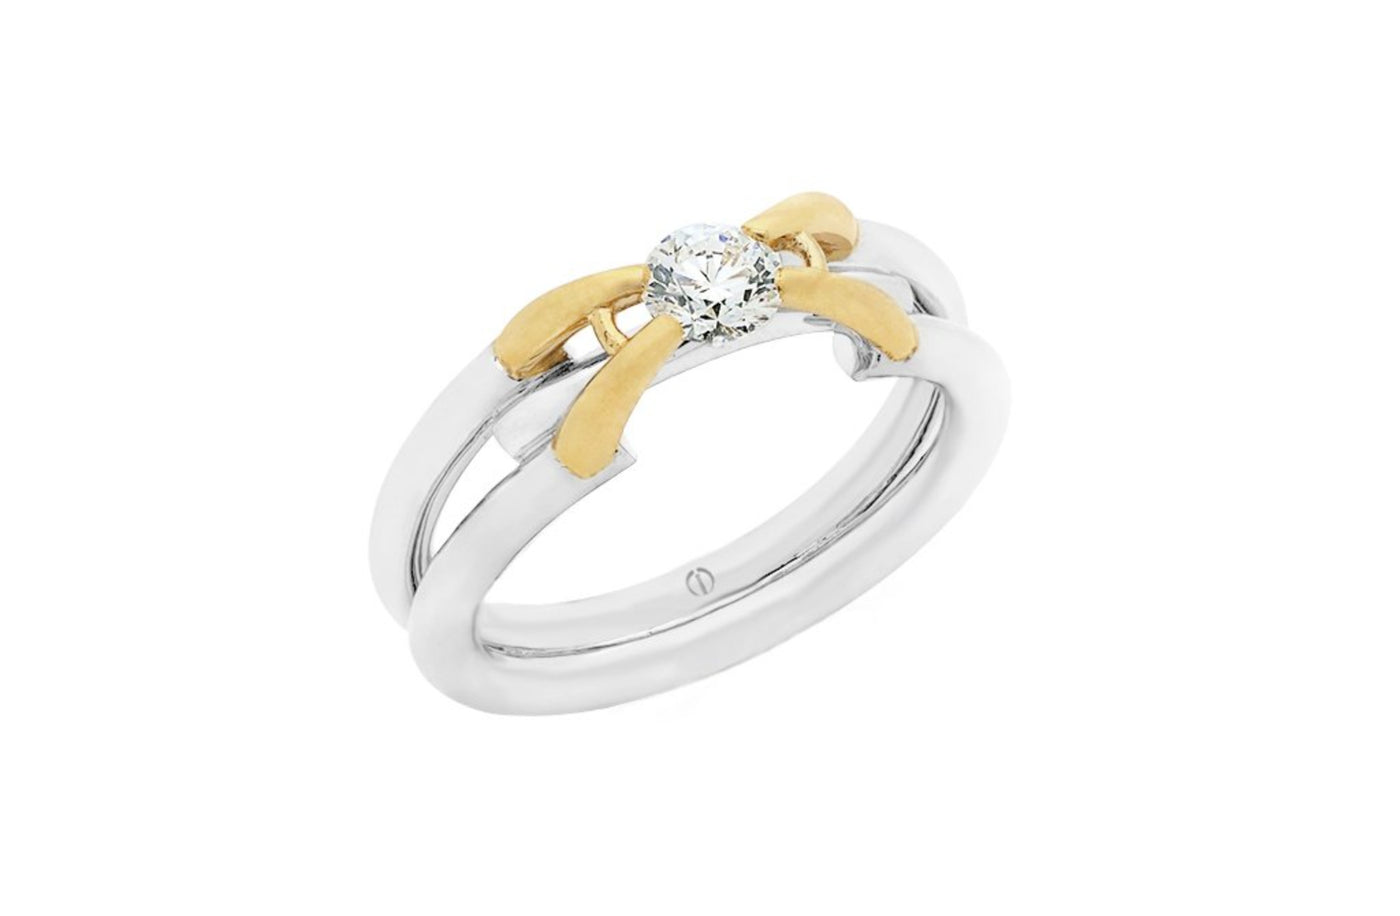 Inspired Collection, Tusk, Elephant, Platinum, 18k, 18ct, White gold yellow gold, brilliant cut, round cut, specialist, contemporary, modern, jewellery, jewelry, engagement ring, ring design, inspired design, tension setting 